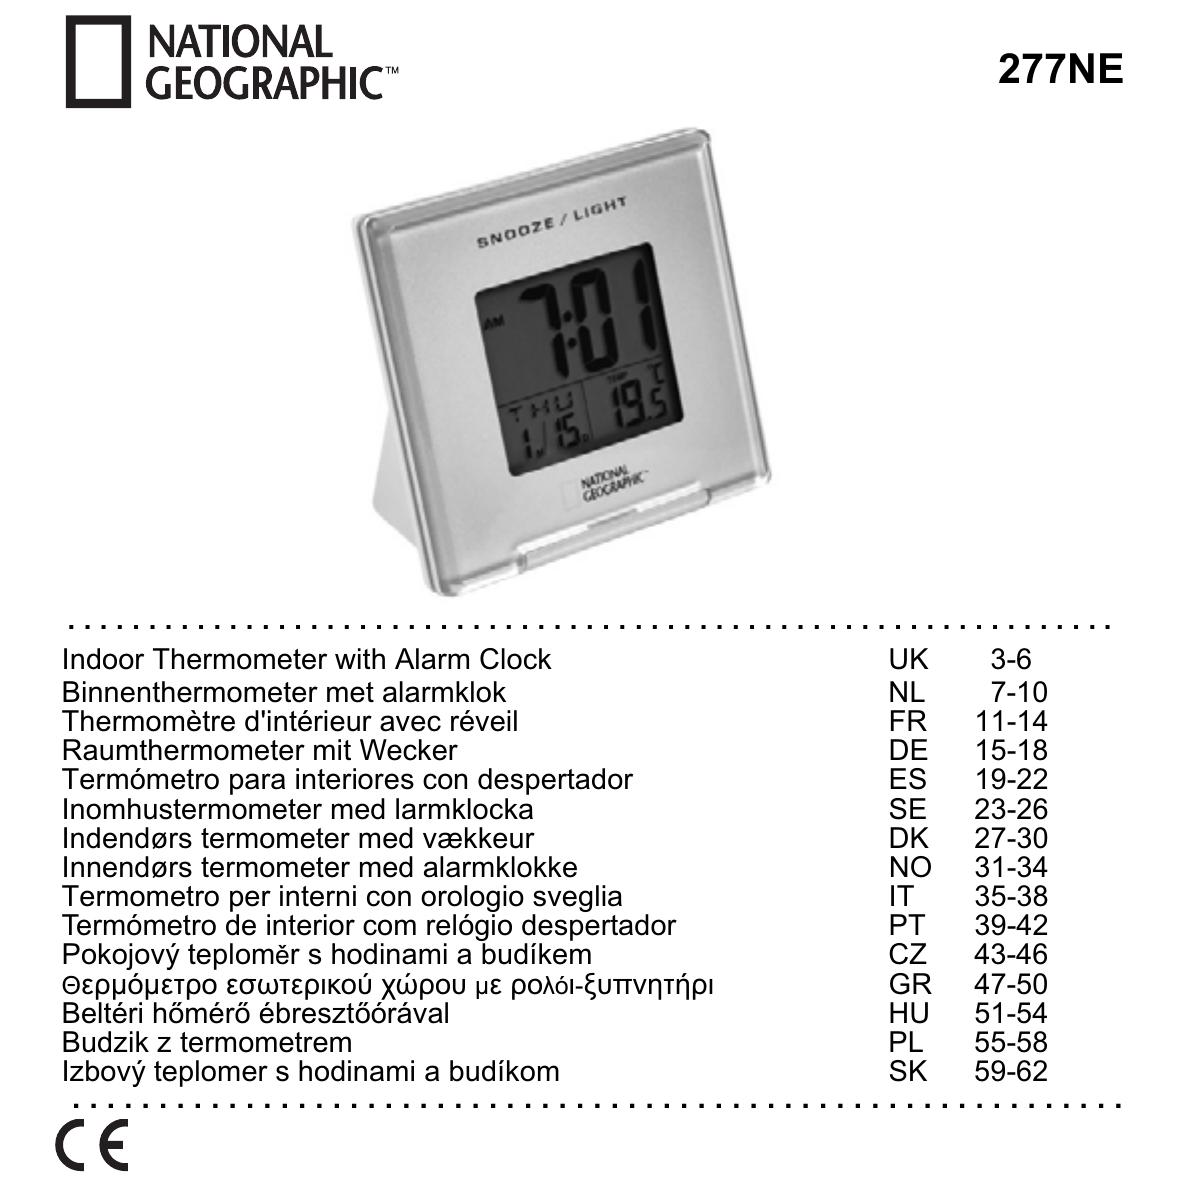 National Geographic 277 NE Thermometer User Manual